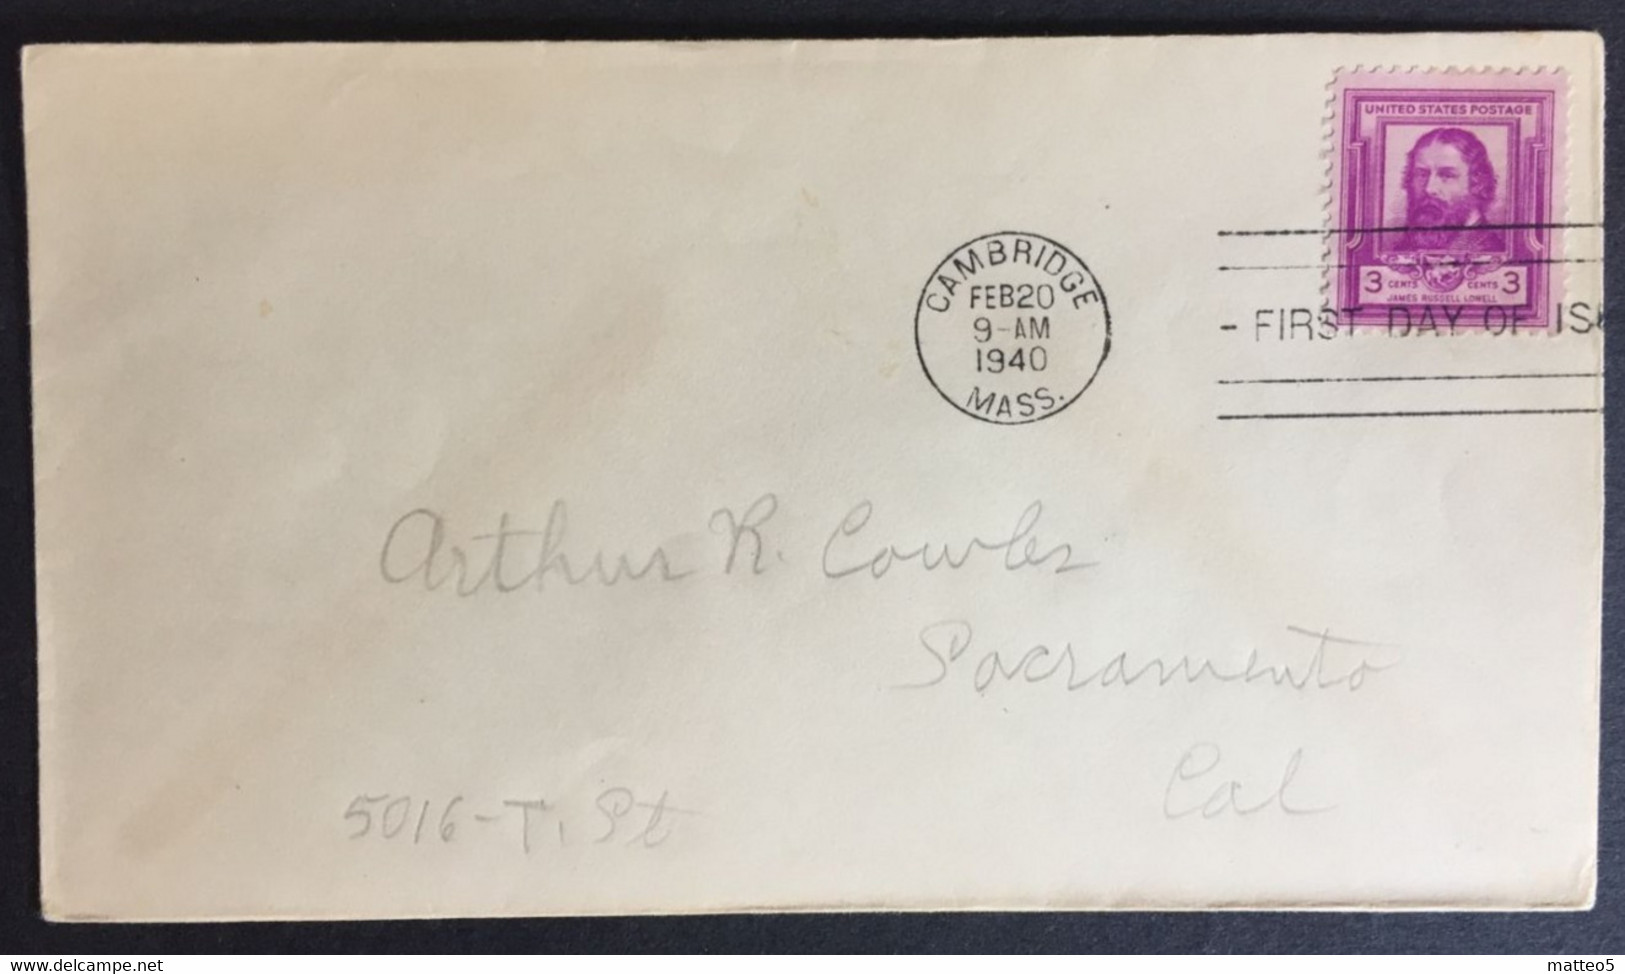 1940 - United States - FDC - James Russel Lowell 3c - Cambridge  - 587 - 1851-1940